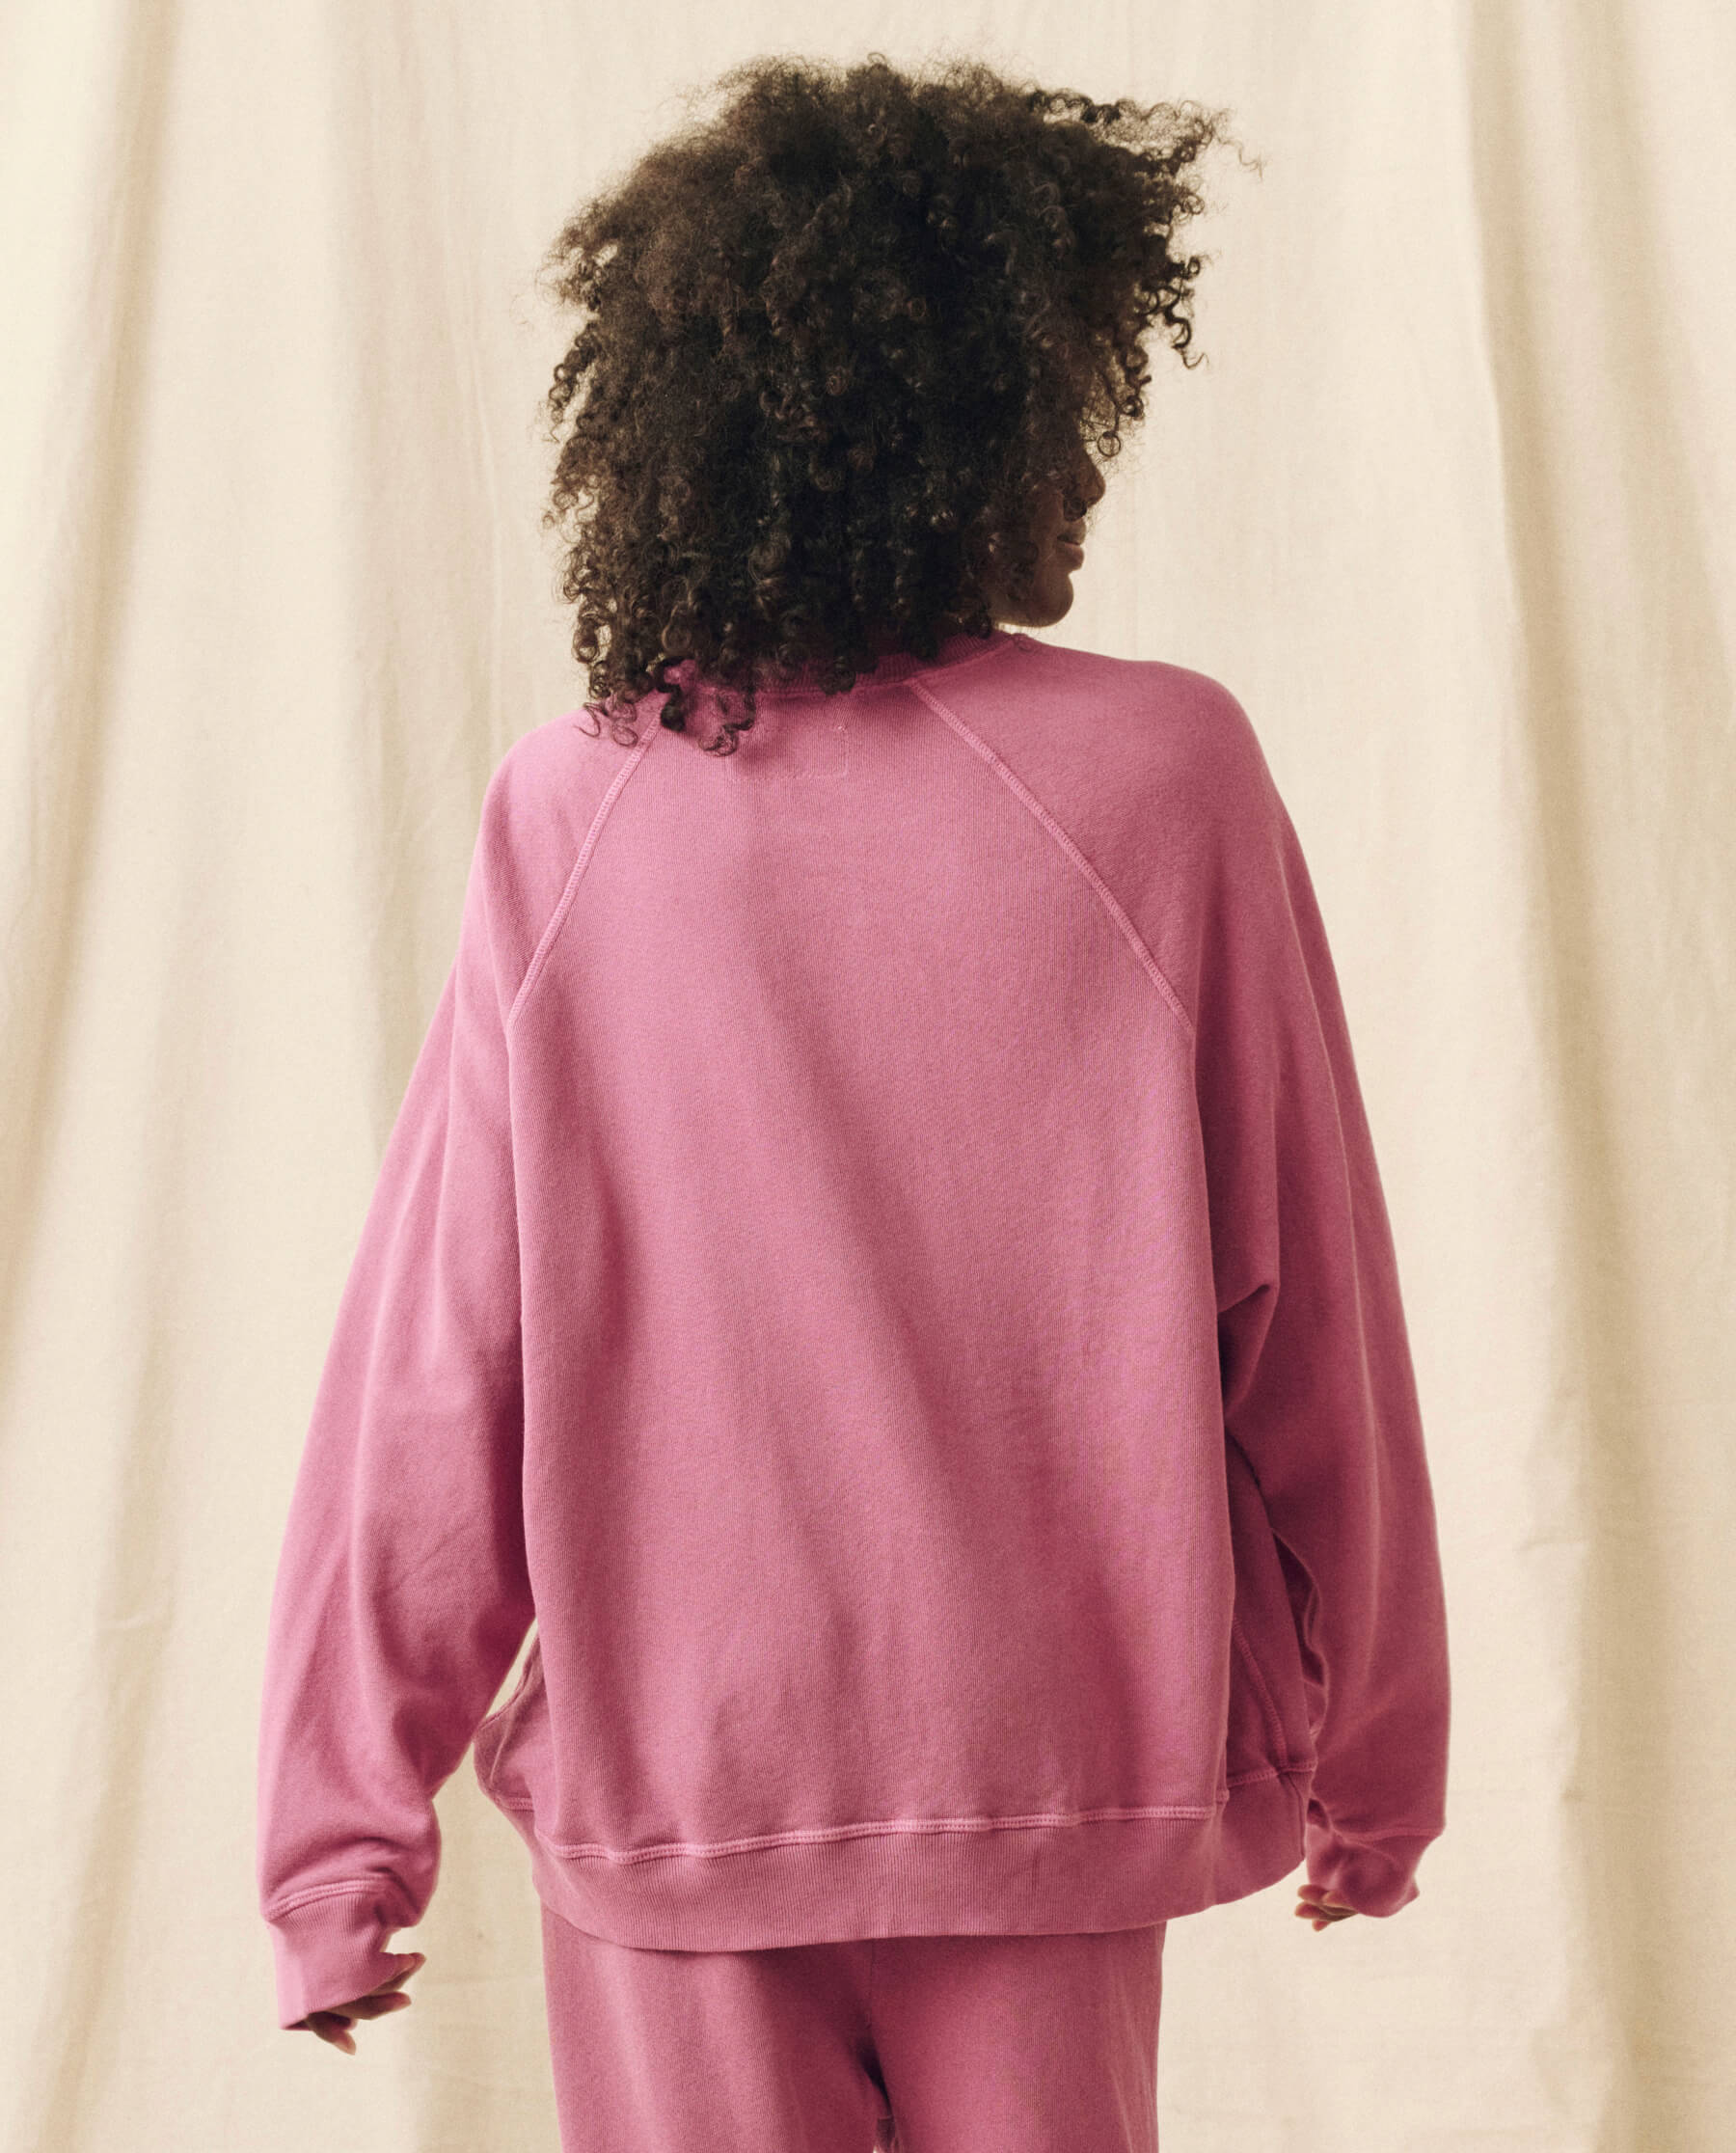 The Slouch Sweatshirt. Solid -- Aubergine SWEATSHIRTS THE GREAT. SP24 KNITS